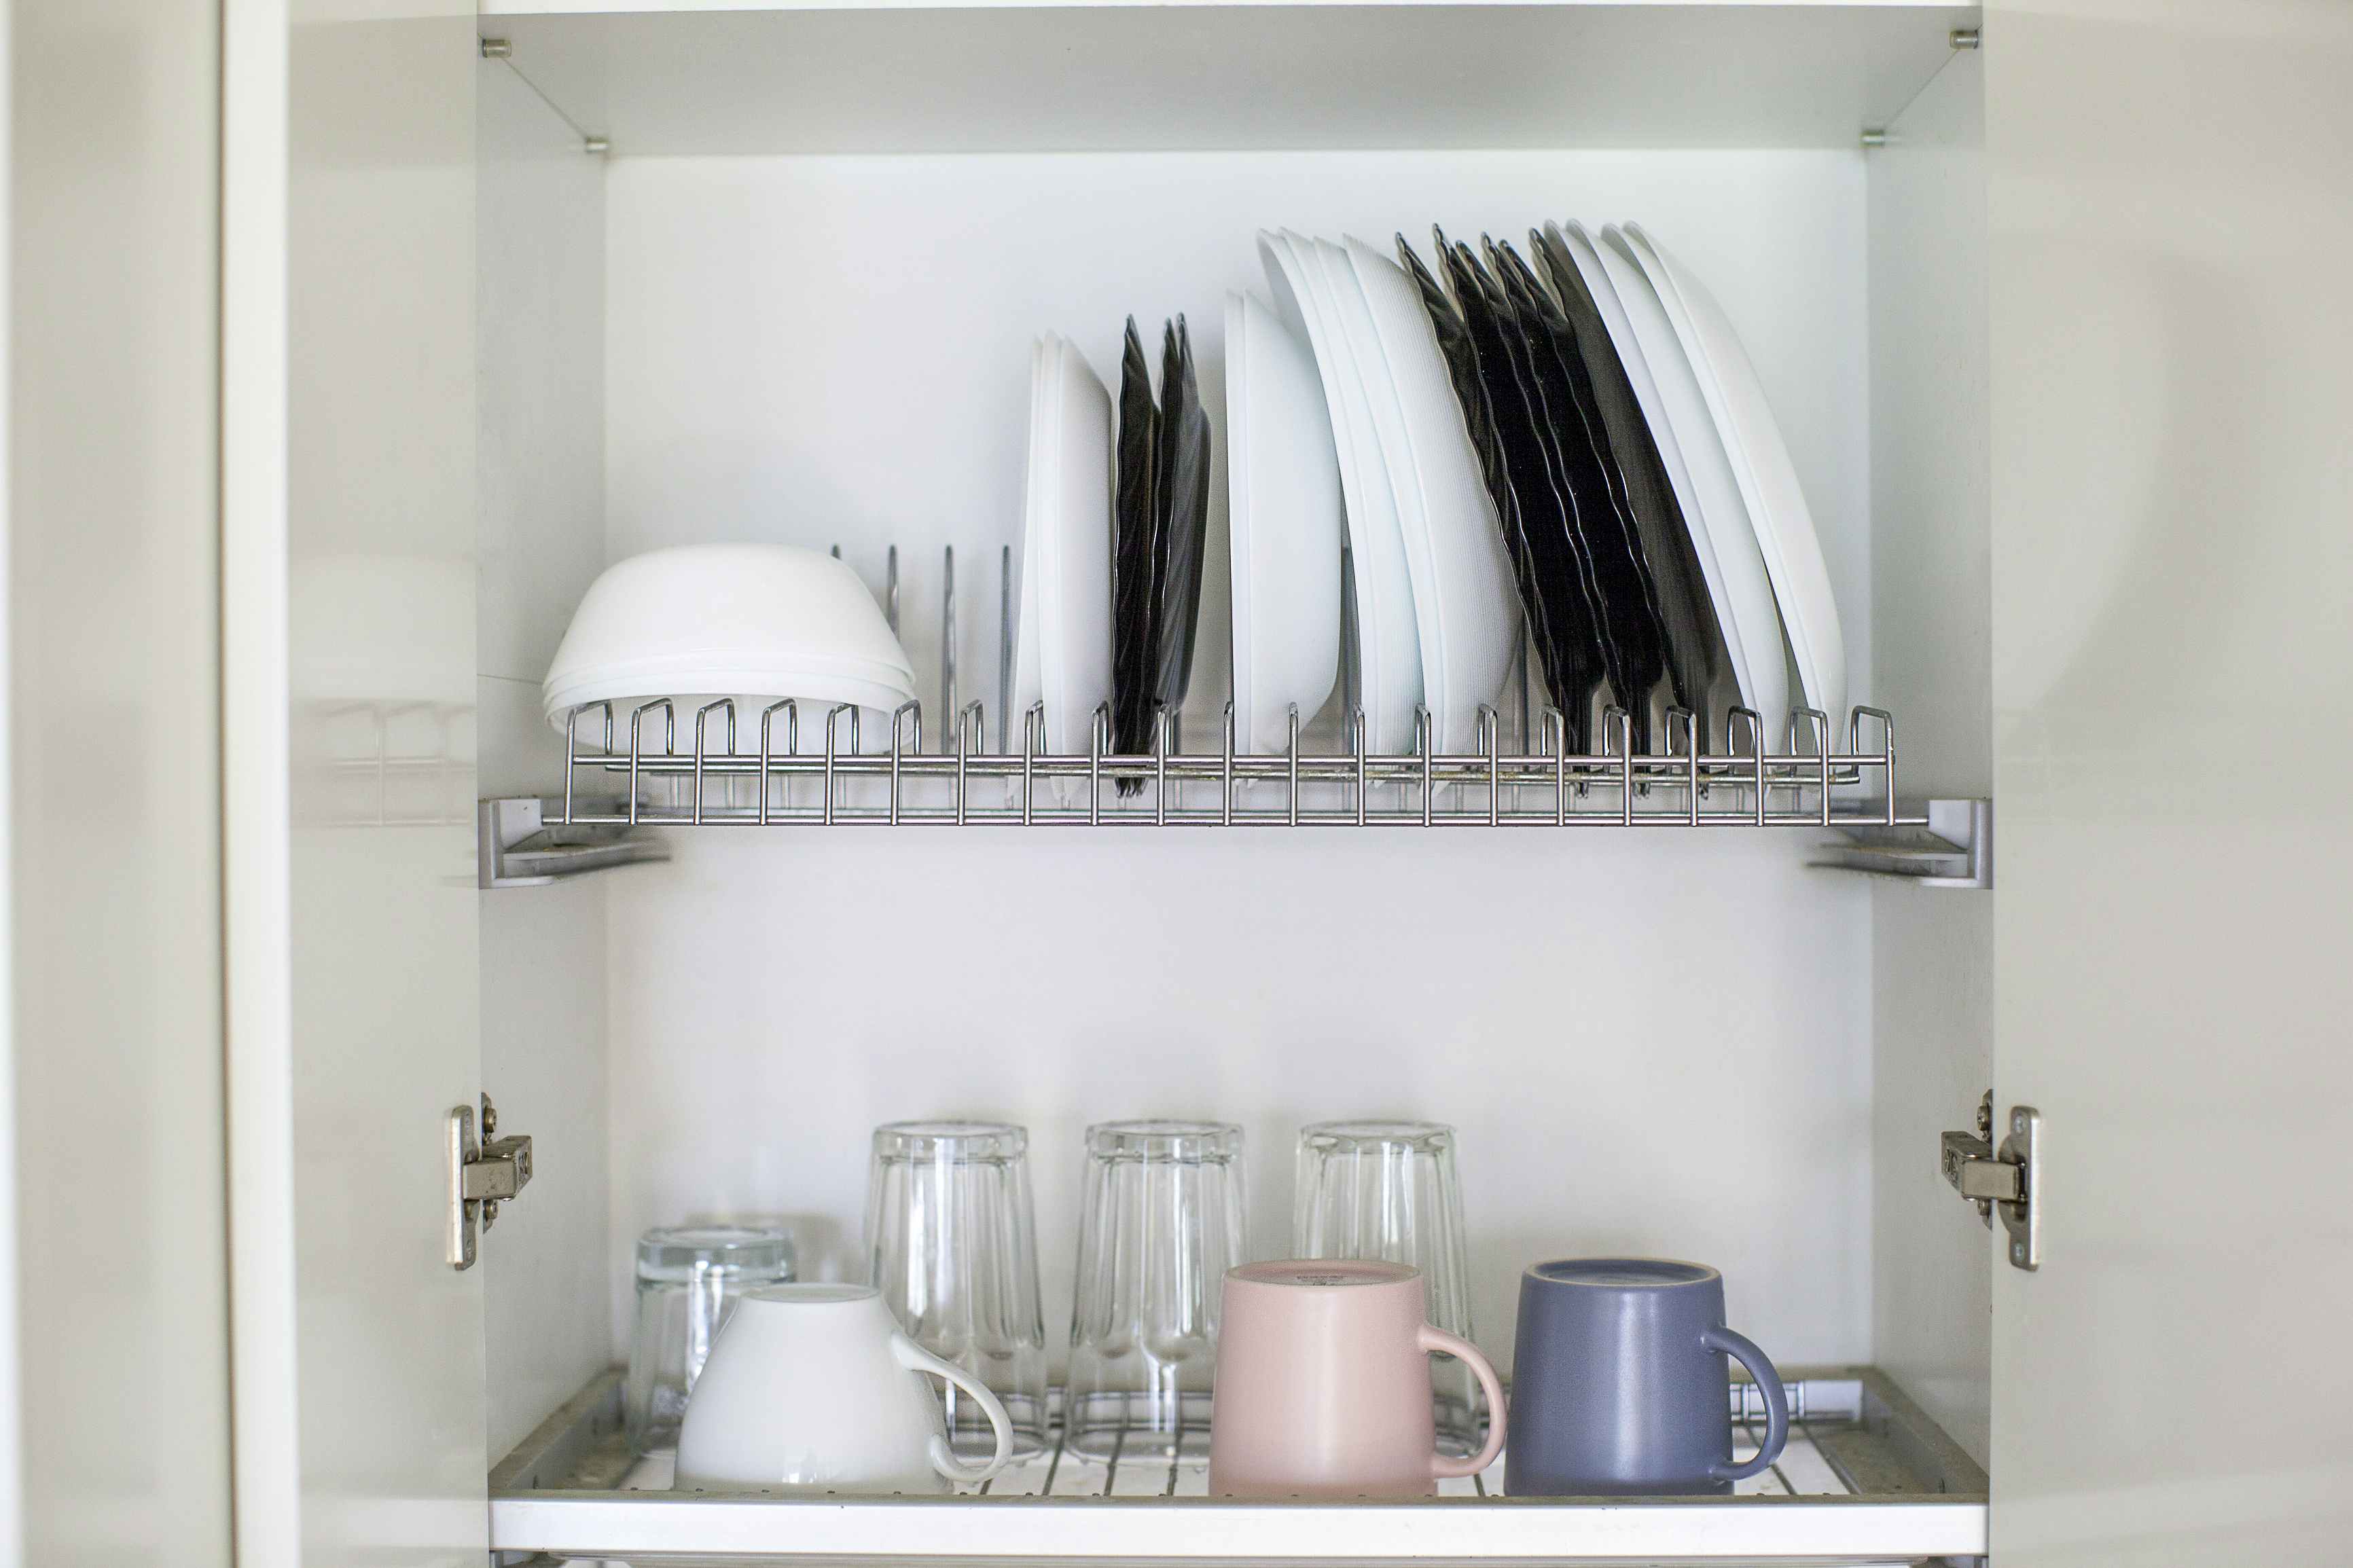 https://prod-cdn-thekrazycouponlady.imgix.net/wp-content/uploads/2016/09/how-to-organize-kitchen-cabinets-hidden-dish-drying-rack-dreamstime-id224842783-1678991225-1678991225.jpg?auto=format&fit=fill&q=25